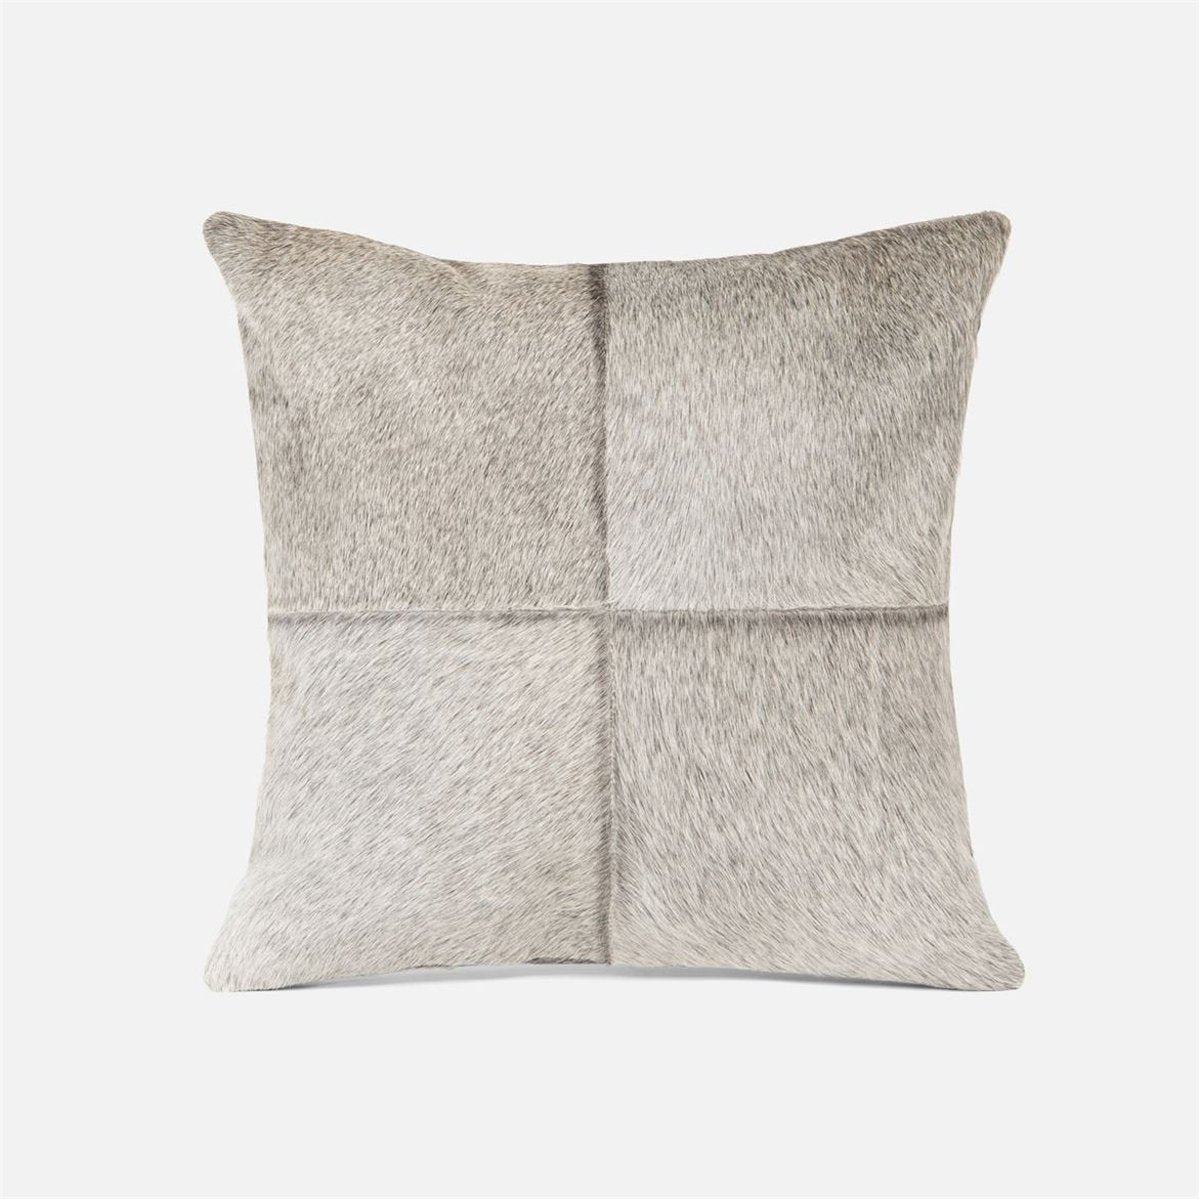 Made Goods Roger Patched Cowhide Pillows, Set of 2